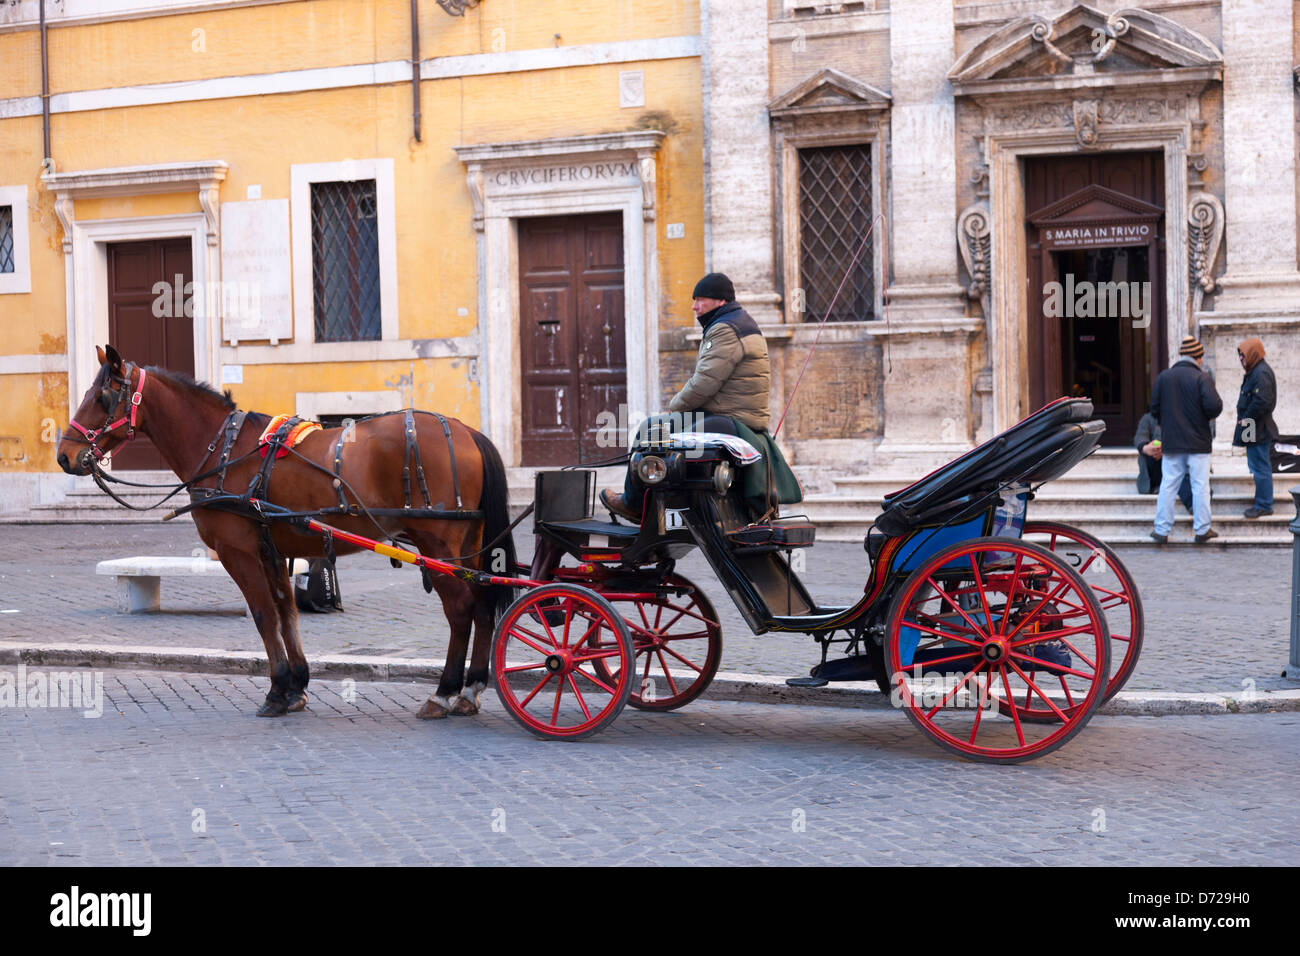 A horse and carriage outside the church of Santa Maria in Trivio, Rome, Italy Stock Photo